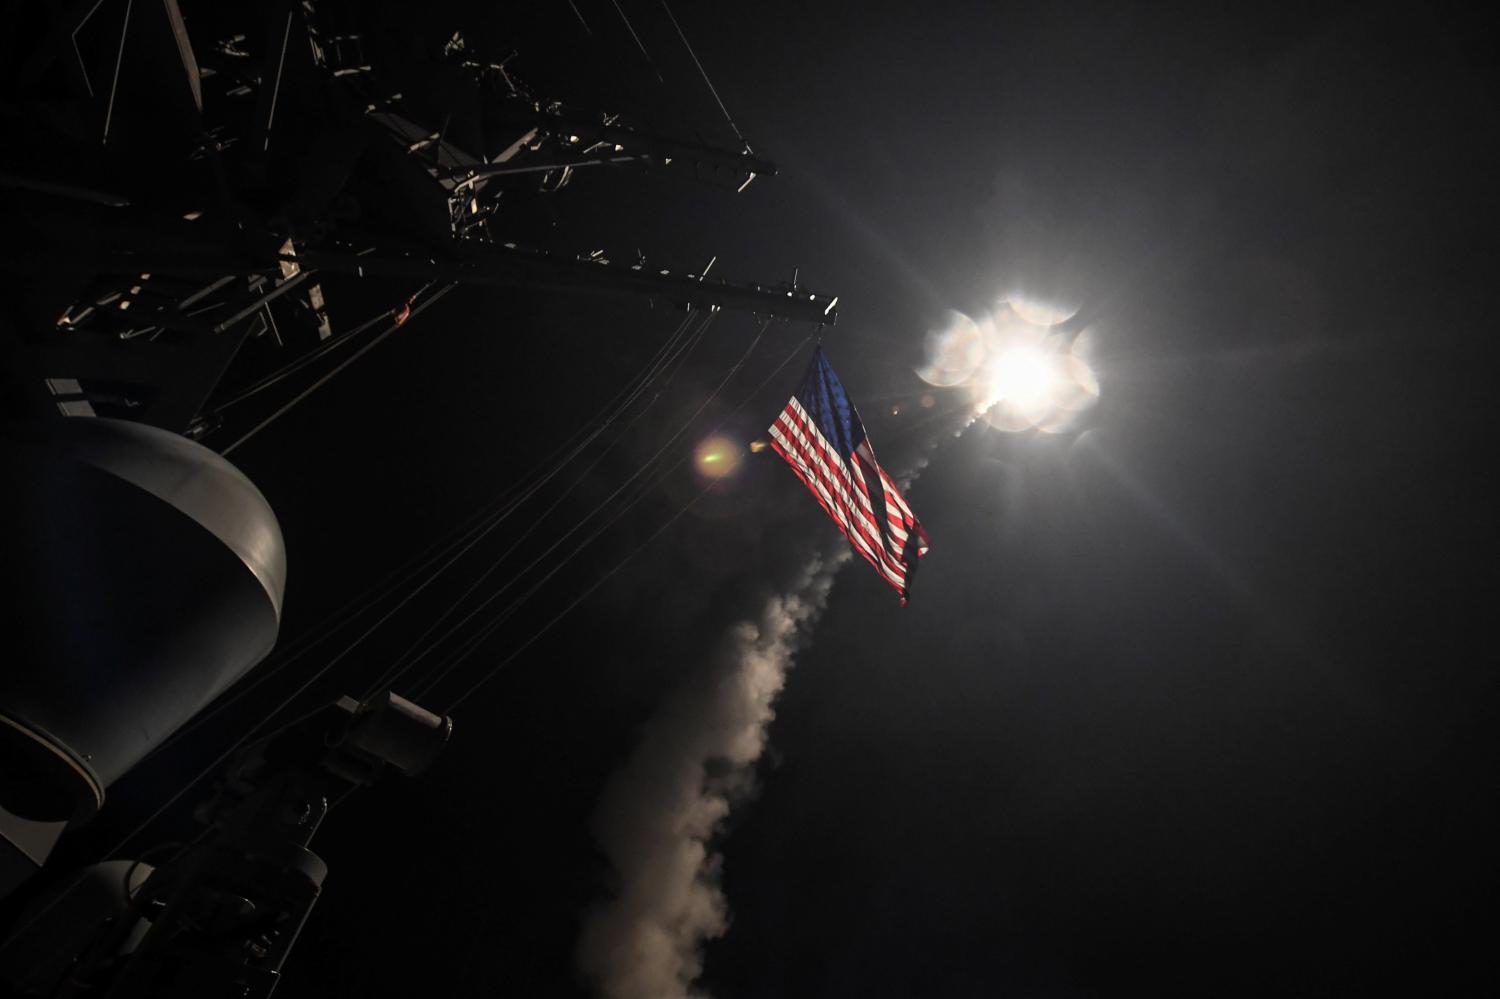 U.S. Navy guided-missile destroyer USS Porter (DDG 78) conducts strike operations while in the Mediterranean Sea which U.S. Defense Department said was a part of cruise missile strike against Syria on April 7, 2017. Ford Williams/Courtesy U.S. Navy/Handout via REUTERS ATTENTION EDITORS - THIS IMAGE WAS PROVIDED BY A THIRD PARTY. EDITORIAL USE ONLY. TPX IMAGES OF THE DAY - RTX34HHA